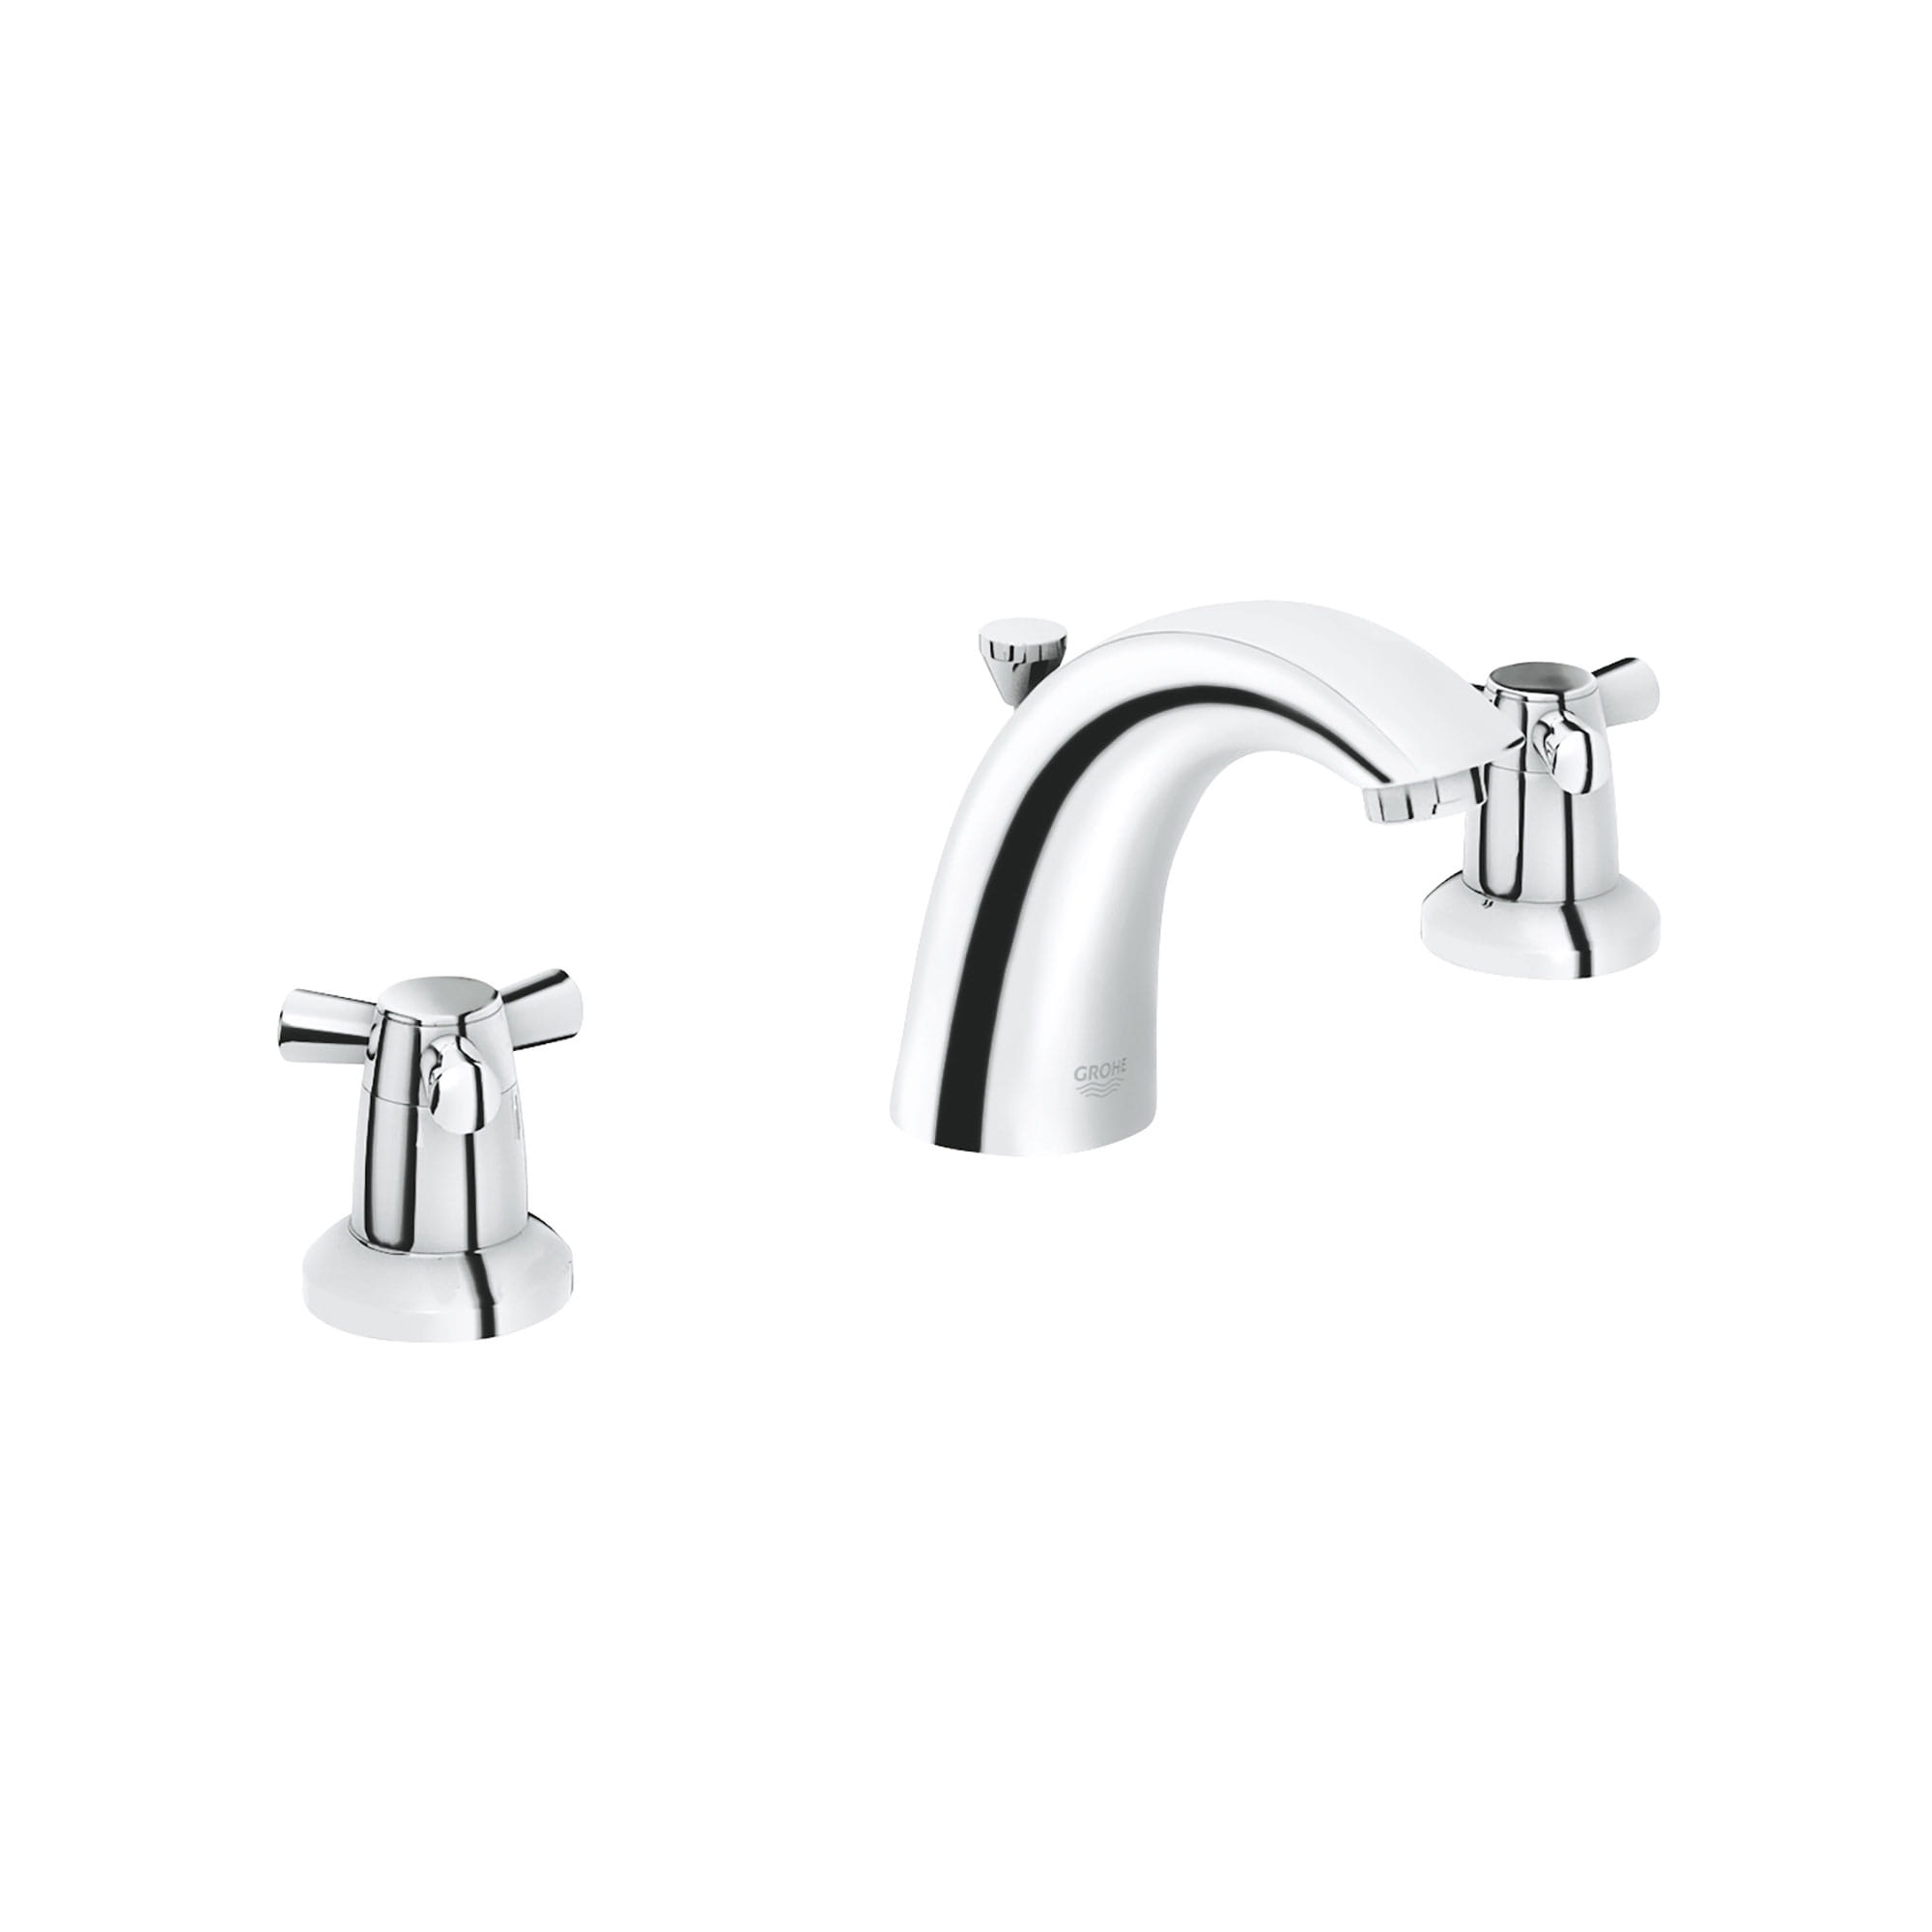 Lavatory 8 in Widespread 2 Handle Bathroom Faucet   12 GPM GROHE CHROME